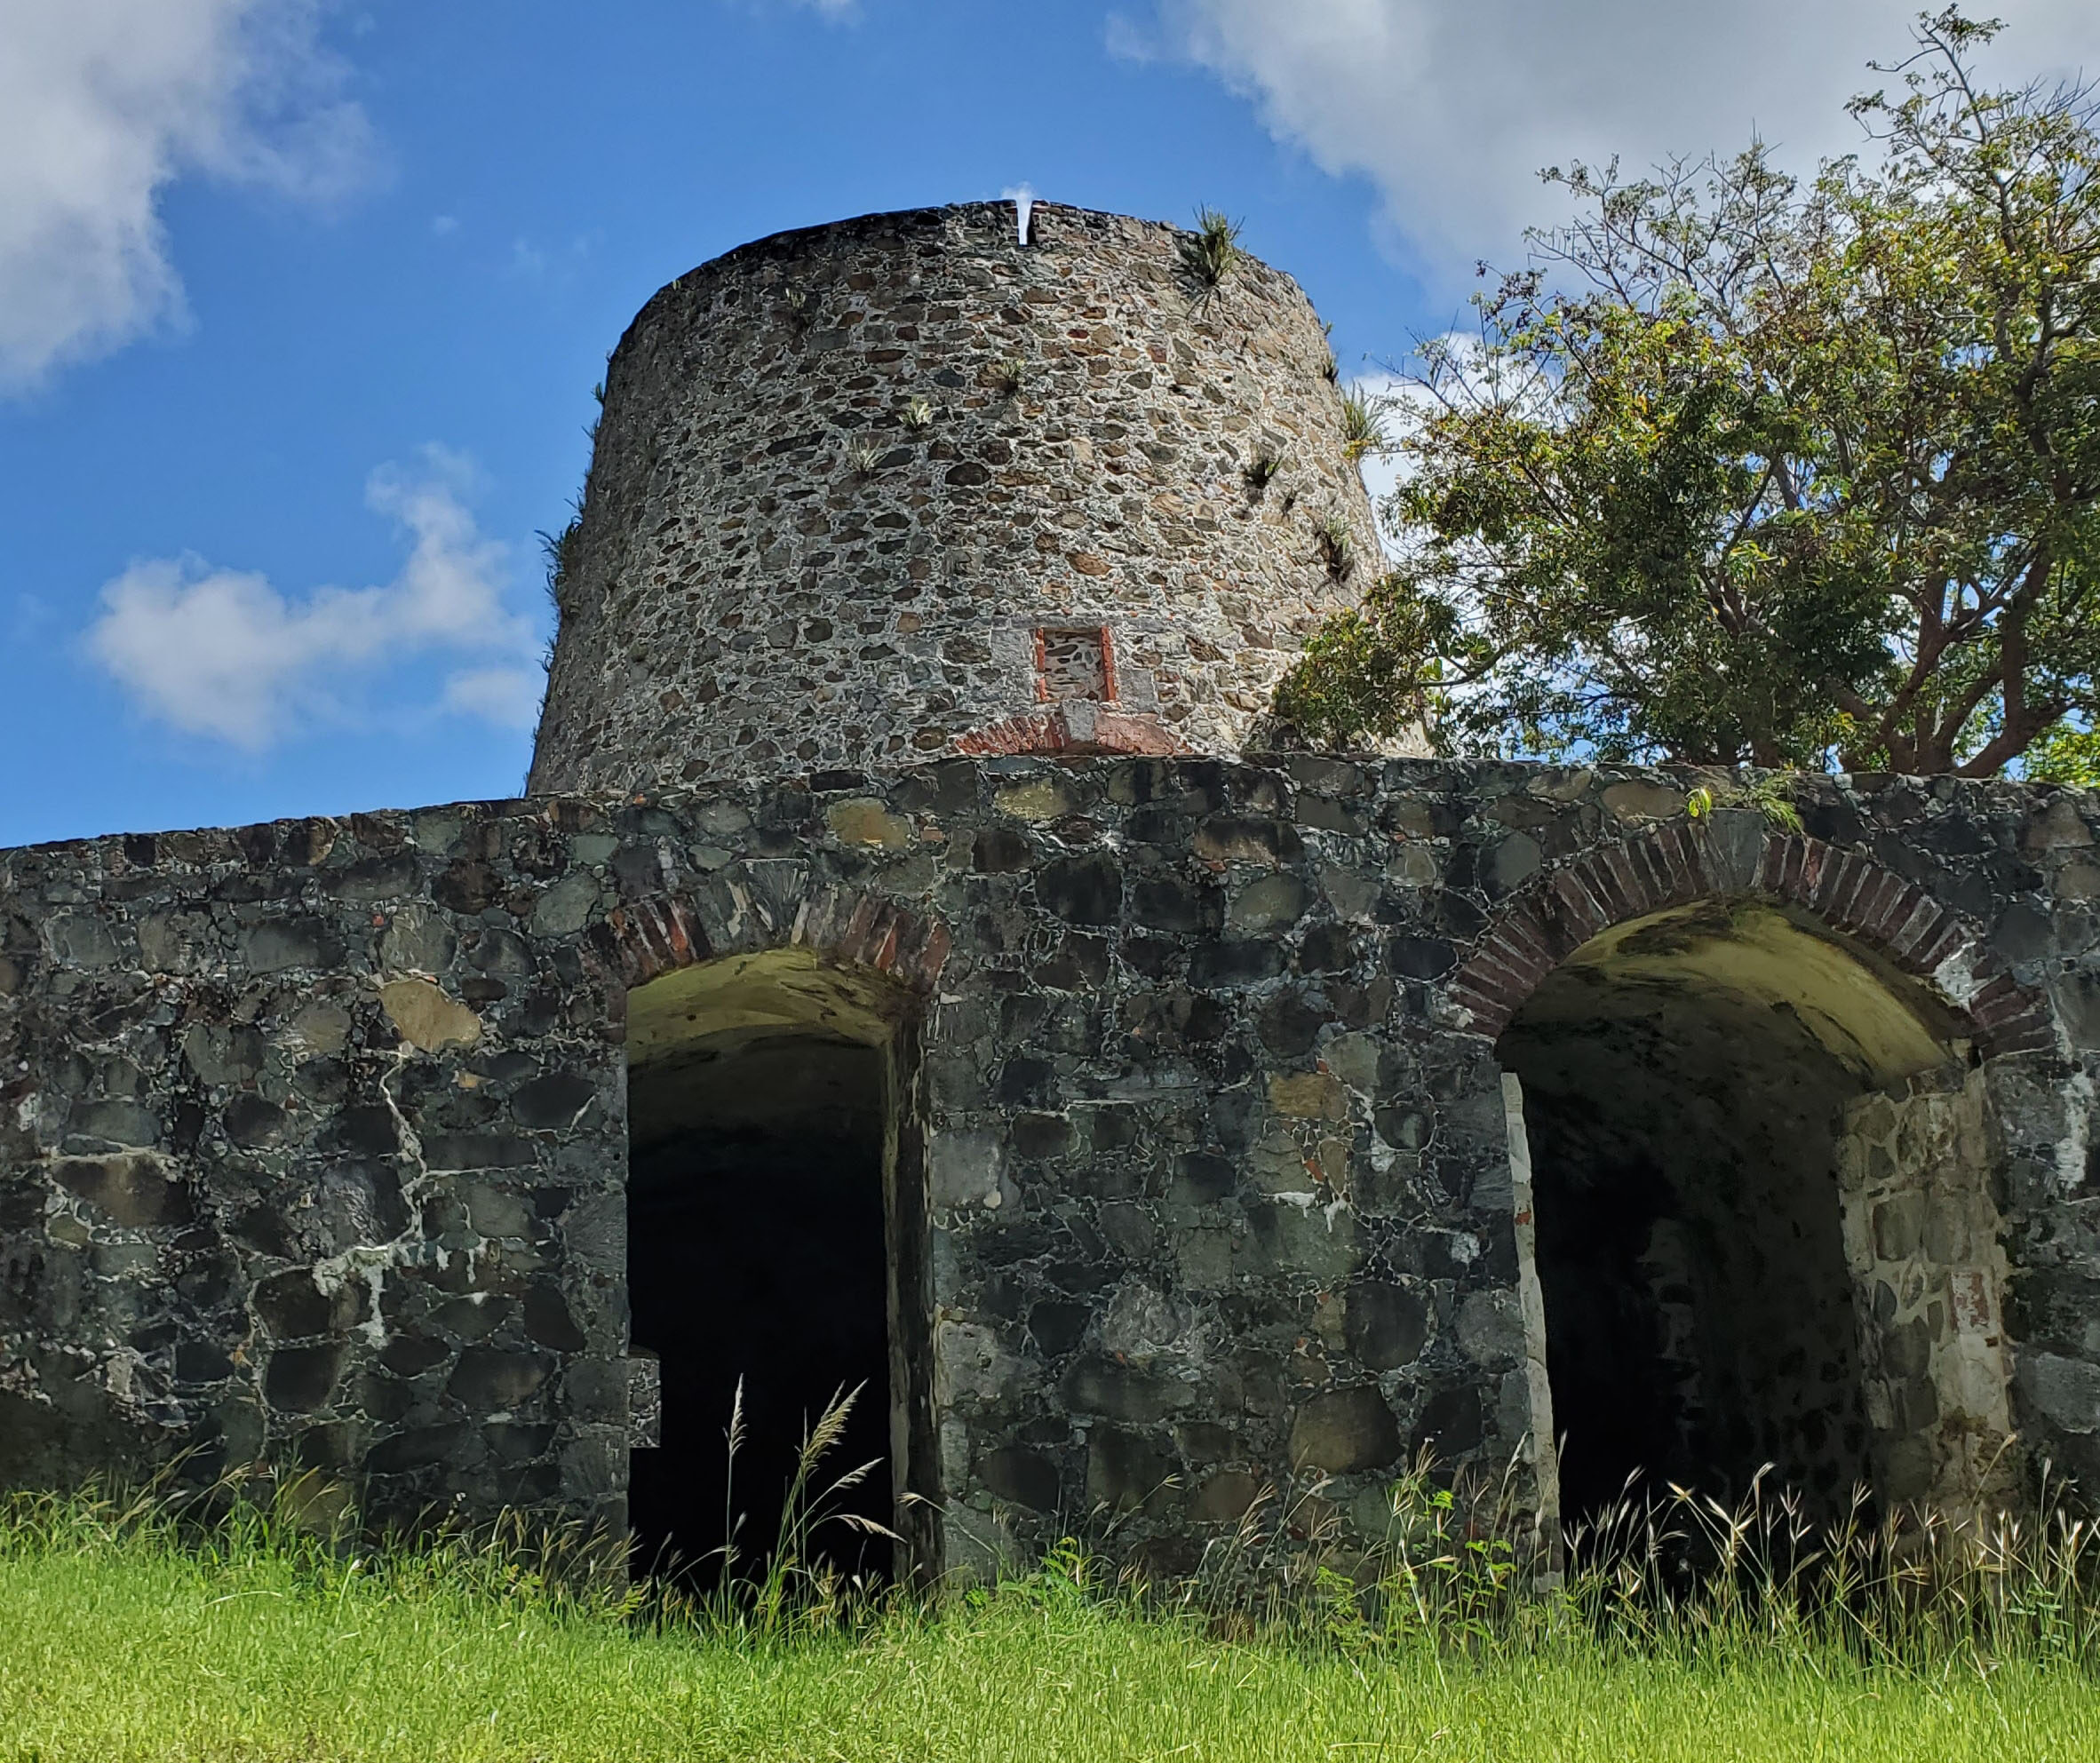 Catherineberg Estate was the headquarters of the Amina warriors who brought the Danish government down to their knees during the revolution of enslaved Africans on St. John. (Photo by Olasee Davis)